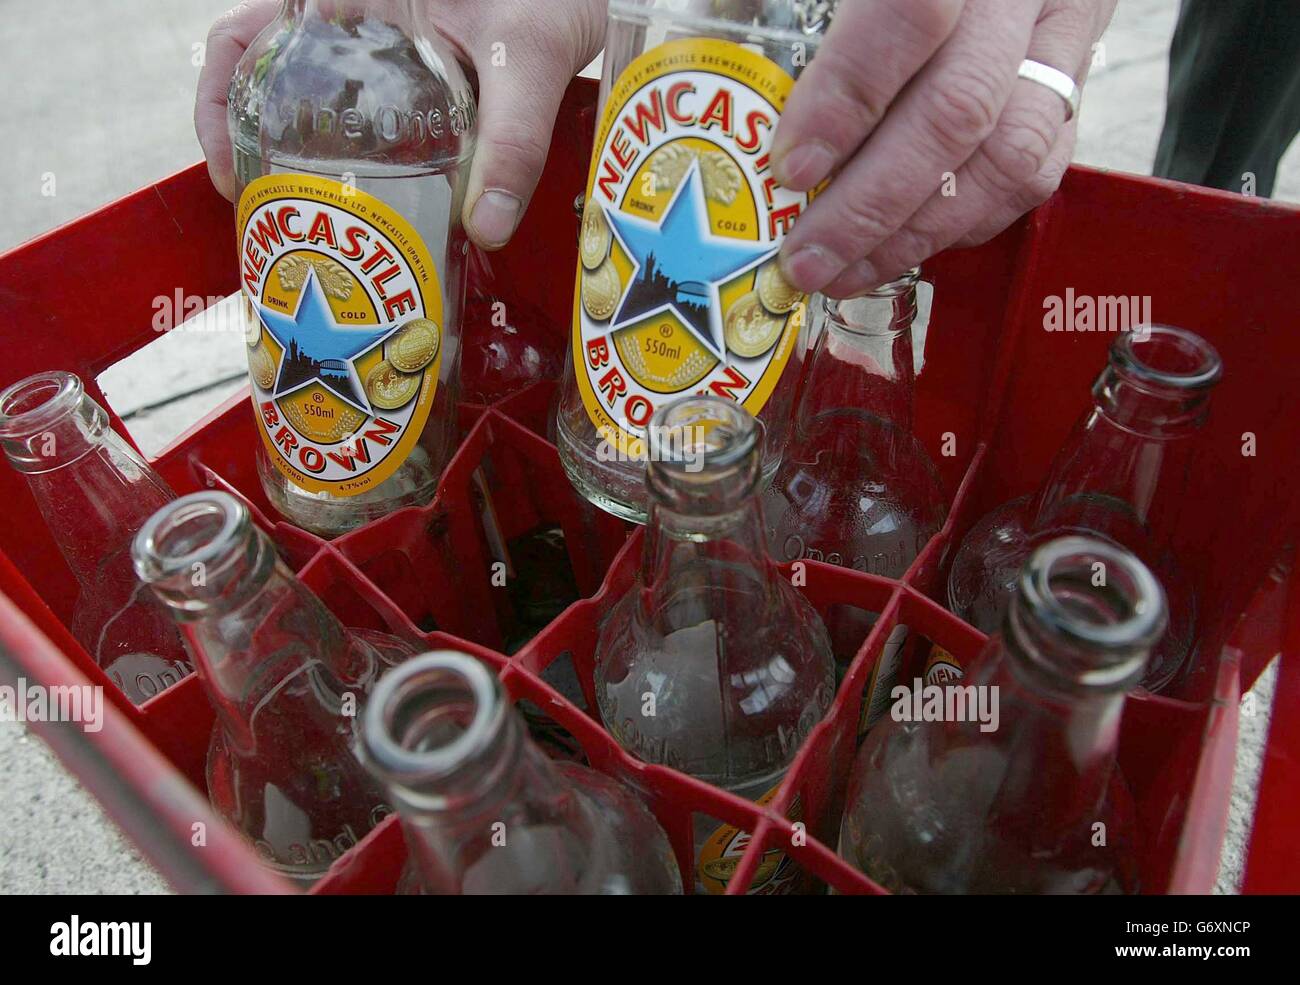 Empty bottles are placed in a crate at the factory of brewer Scottish Courage, which plans to move production of its Newcastle ale brands to the Northern Clubs Federation Brewery (NCFB) across the Tyne in Dunston, it will acquire for 7.2 million. The move to the NCFB site will involve the loss of around 100 jobs. Todays announcement means that the world famous Newcastle Brown Ale will no longer be brewed in the city, since the production in 1927, known also for its advertising slogan 'The One and Only'. Stock Photo